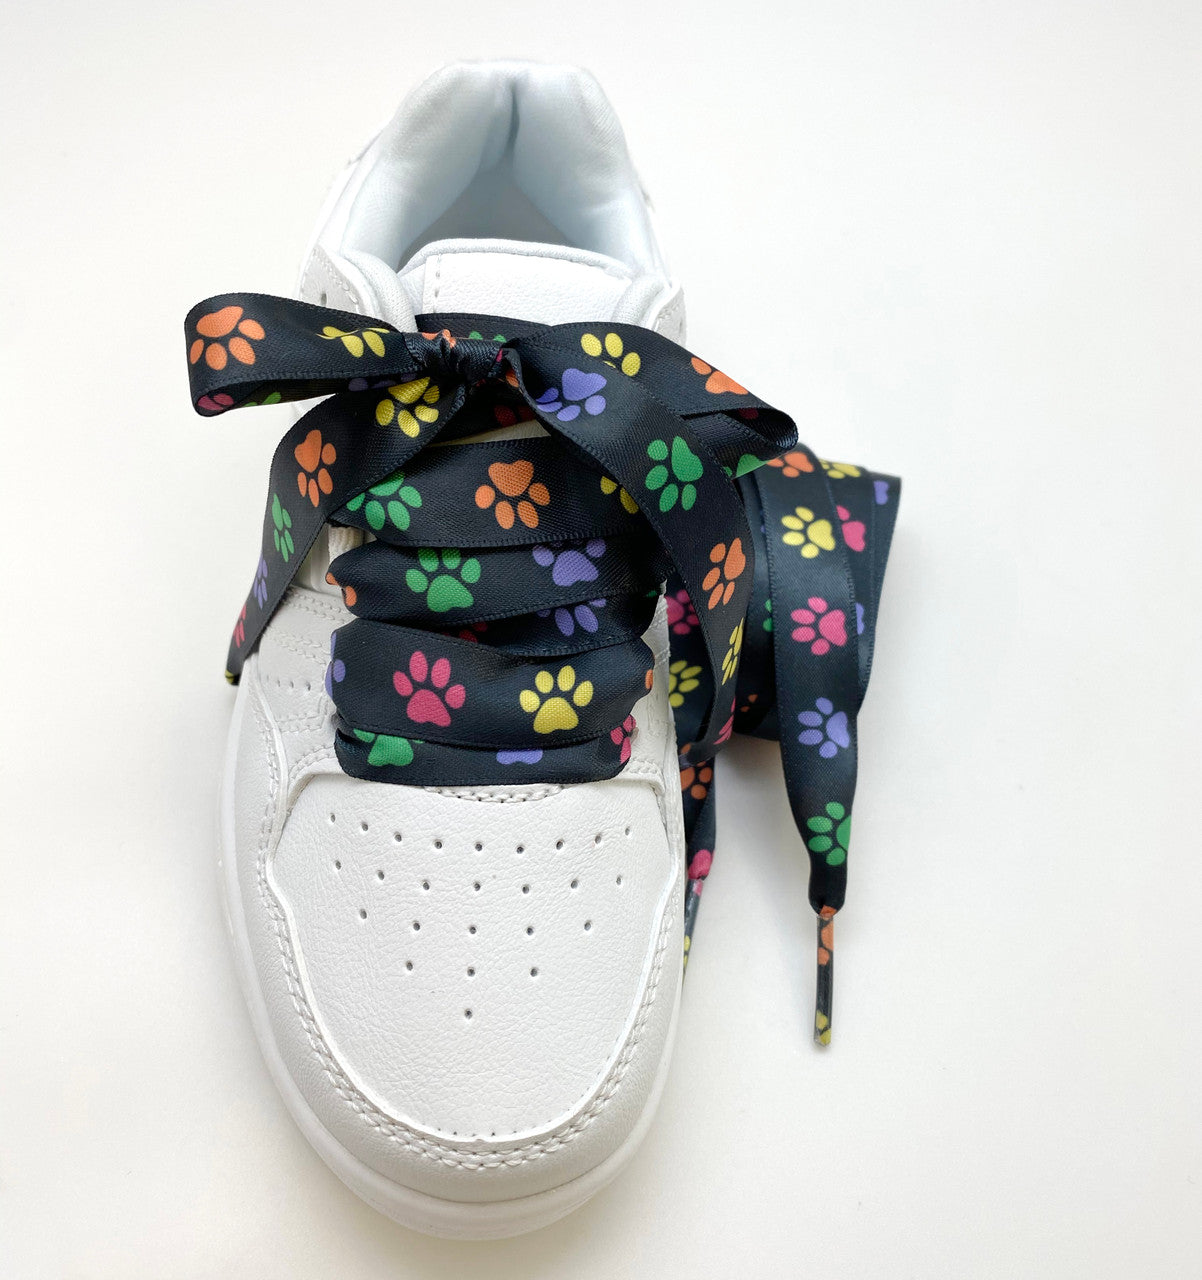 Lace your shoes with  our fun rainbow paws print design!